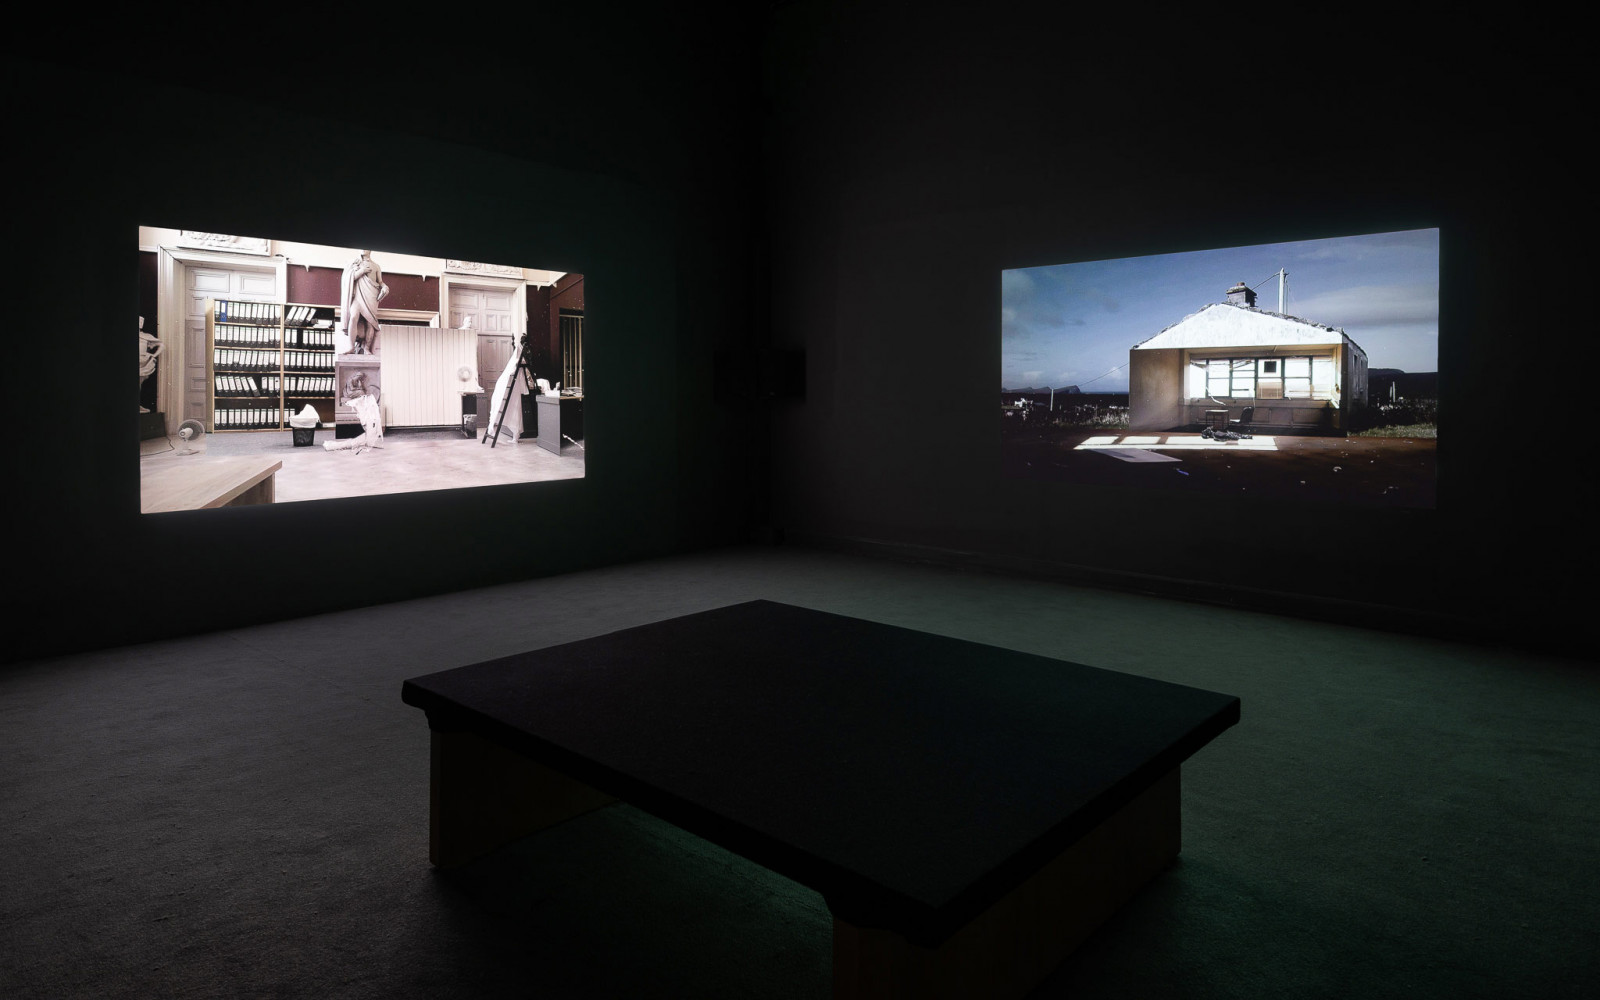 Ailbhe Ní Bhriain 'Great Good Places' four channel installation, video & cgi composite, colour, sound, looped, 2011, at Crawford Art Gallery, Cork 2019 (solo), curated by Dawn Williams, installation photography by Jed Niezgoda.